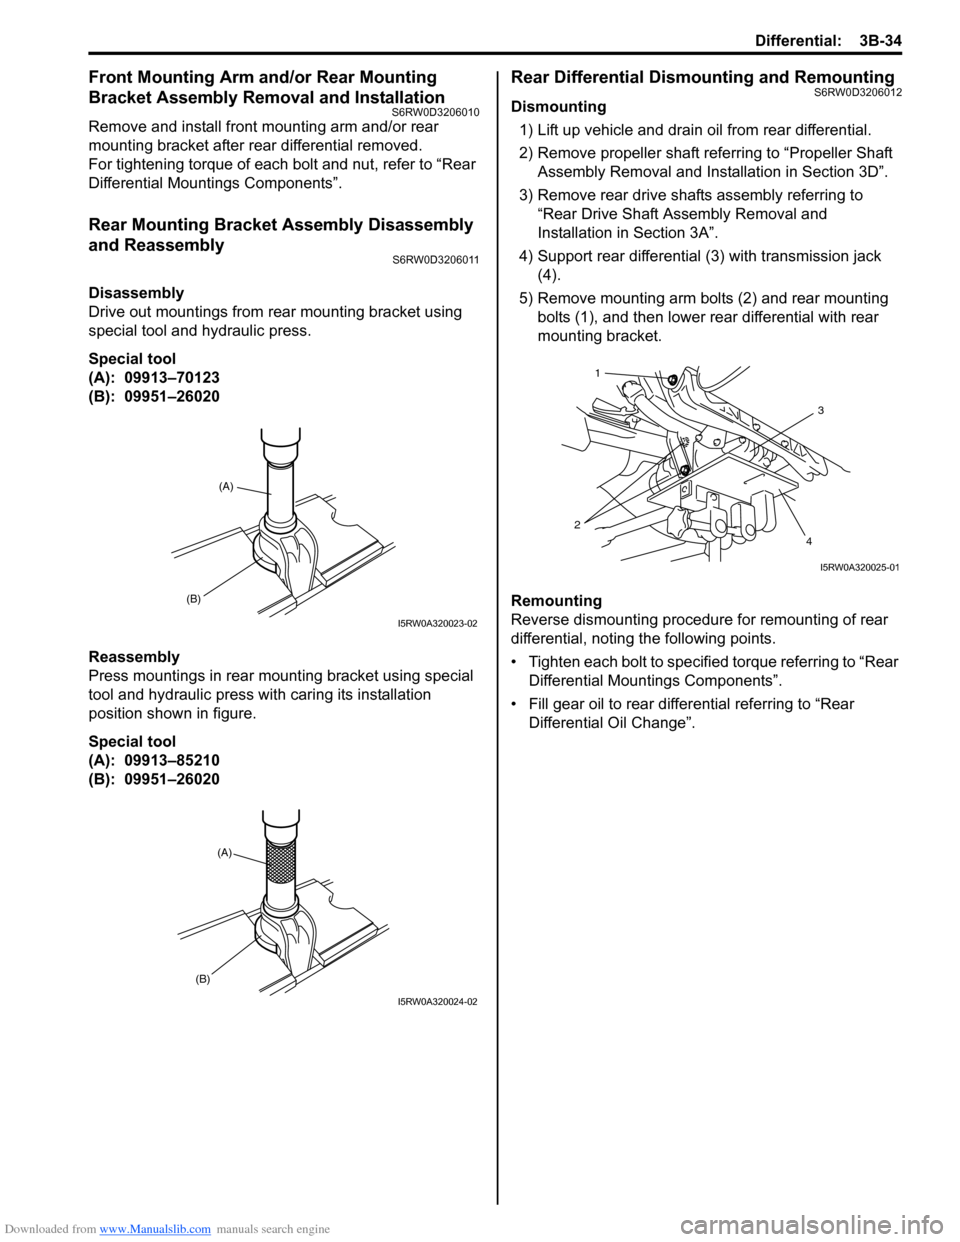 SUZUKI SX4 2006 1.G Service Workshop Manual Downloaded from www.Manualslib.com manuals search engine Differential: 3B-34
Front Mounting Arm and/or Rear Mounting 
Bracket Assembly Removal and Installation
S6RW0D3206010
Remove and install front m